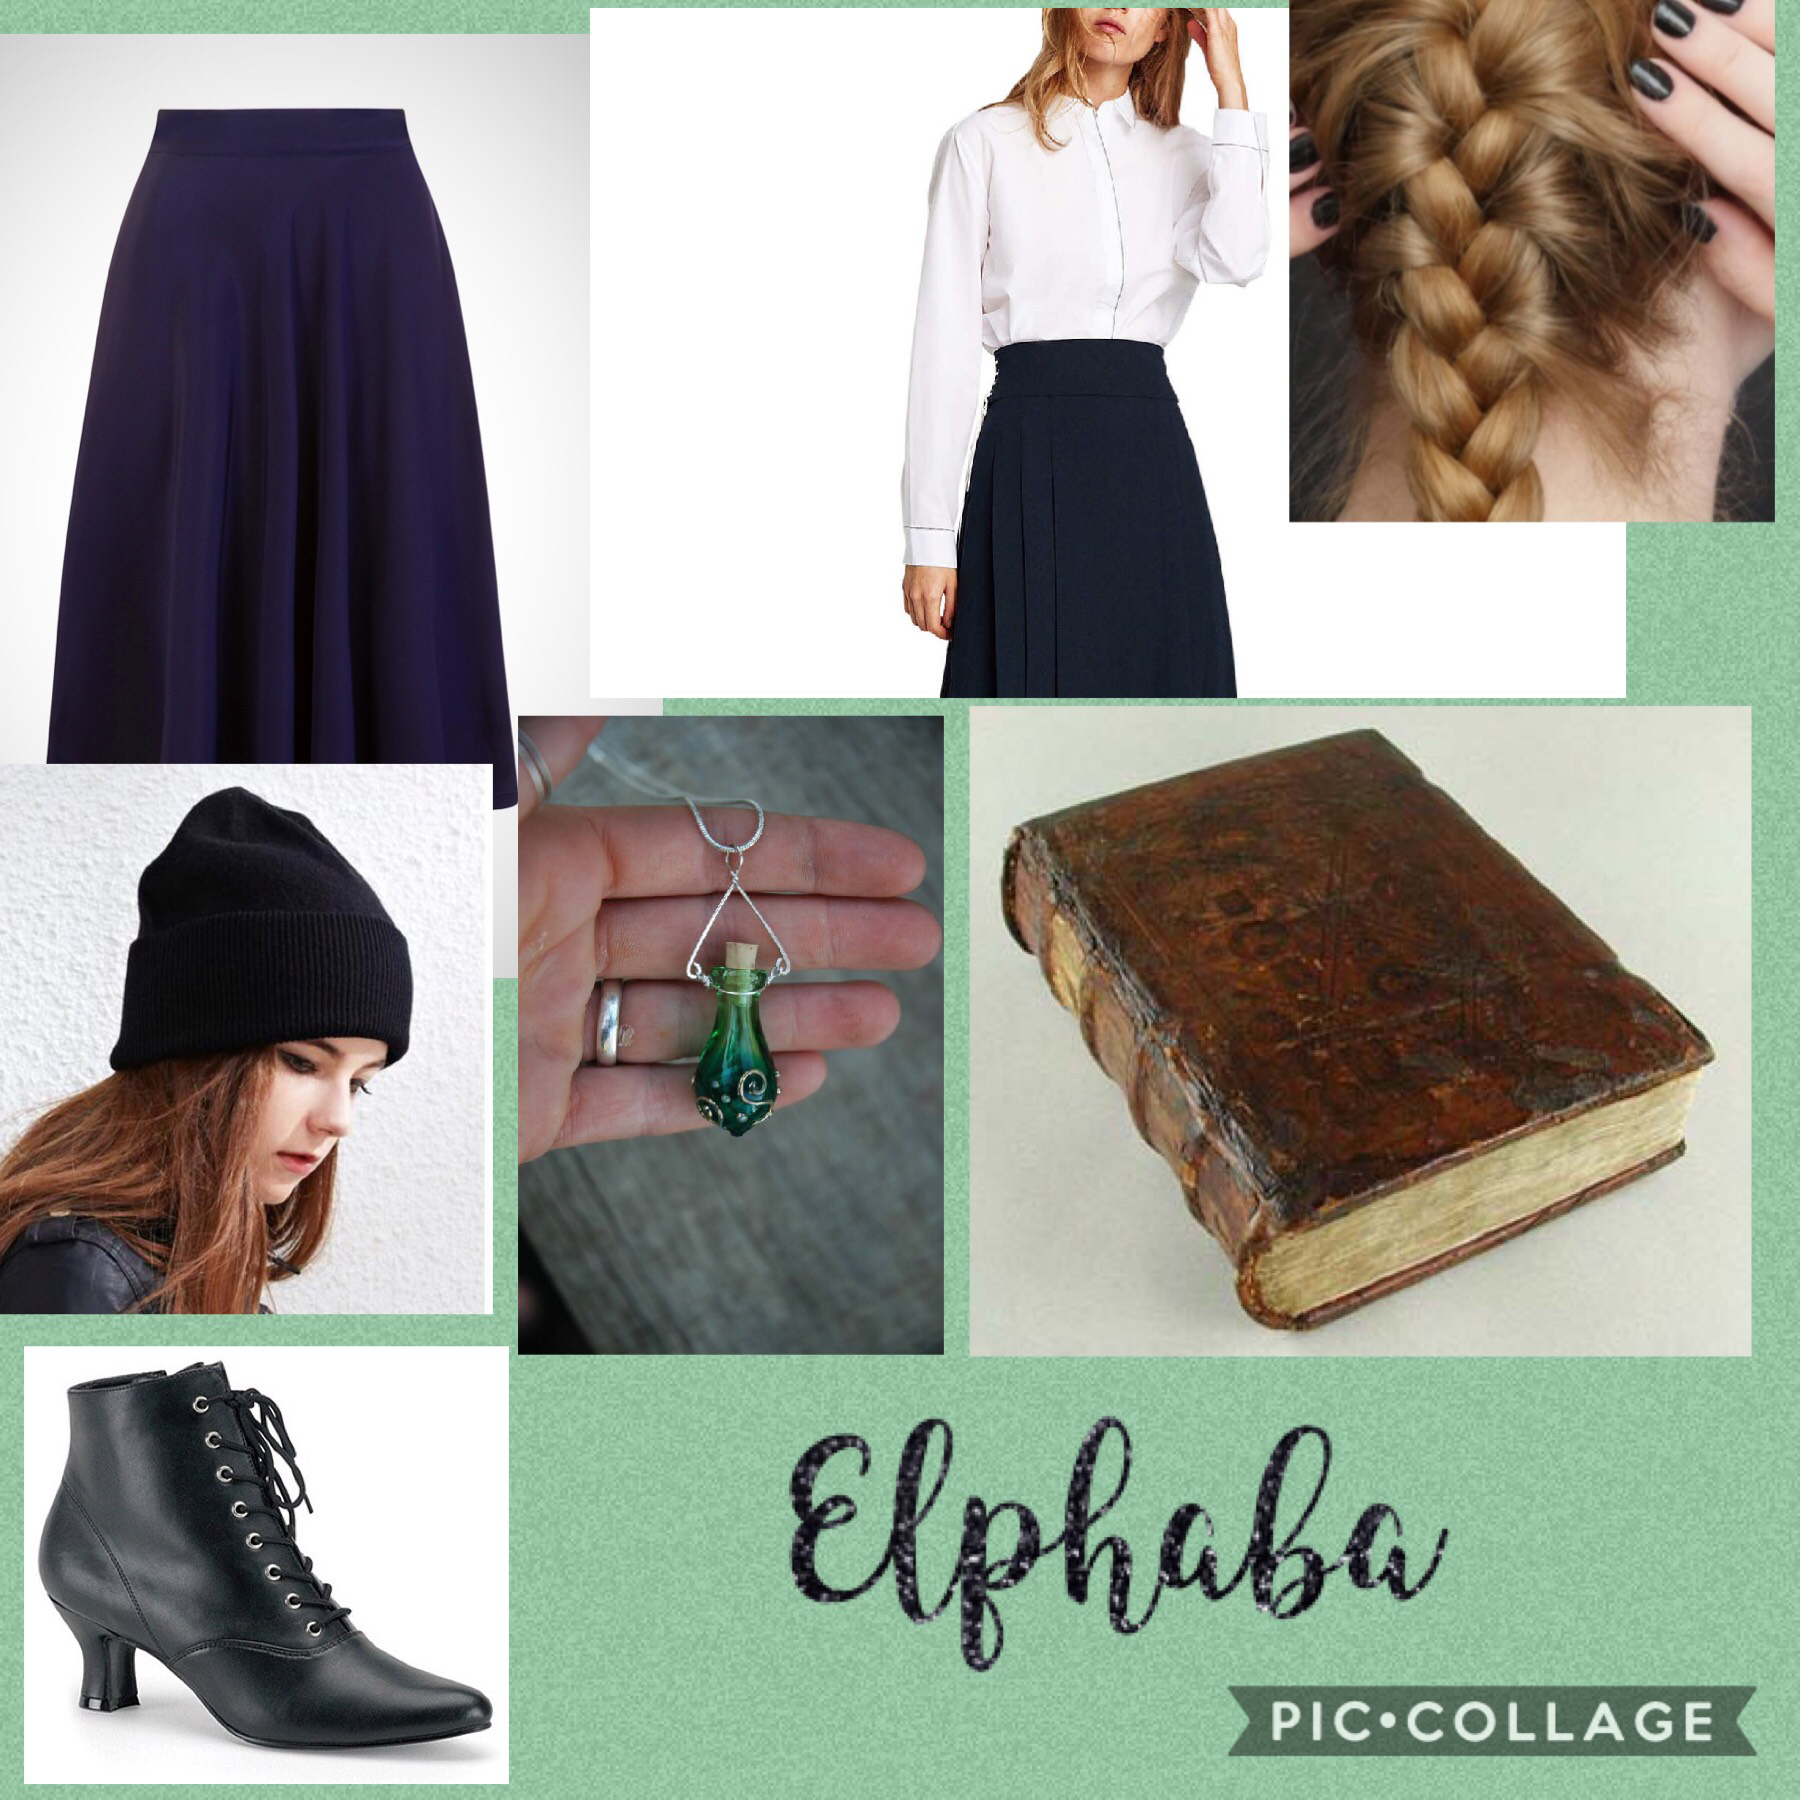 I'm a bit addicted to Wicked so I decided to do Elphaba!!! I tried to make it fashionable while still staying true to her style! This is her college look rather than her wicked witch look..... #storybounding #elphaba 